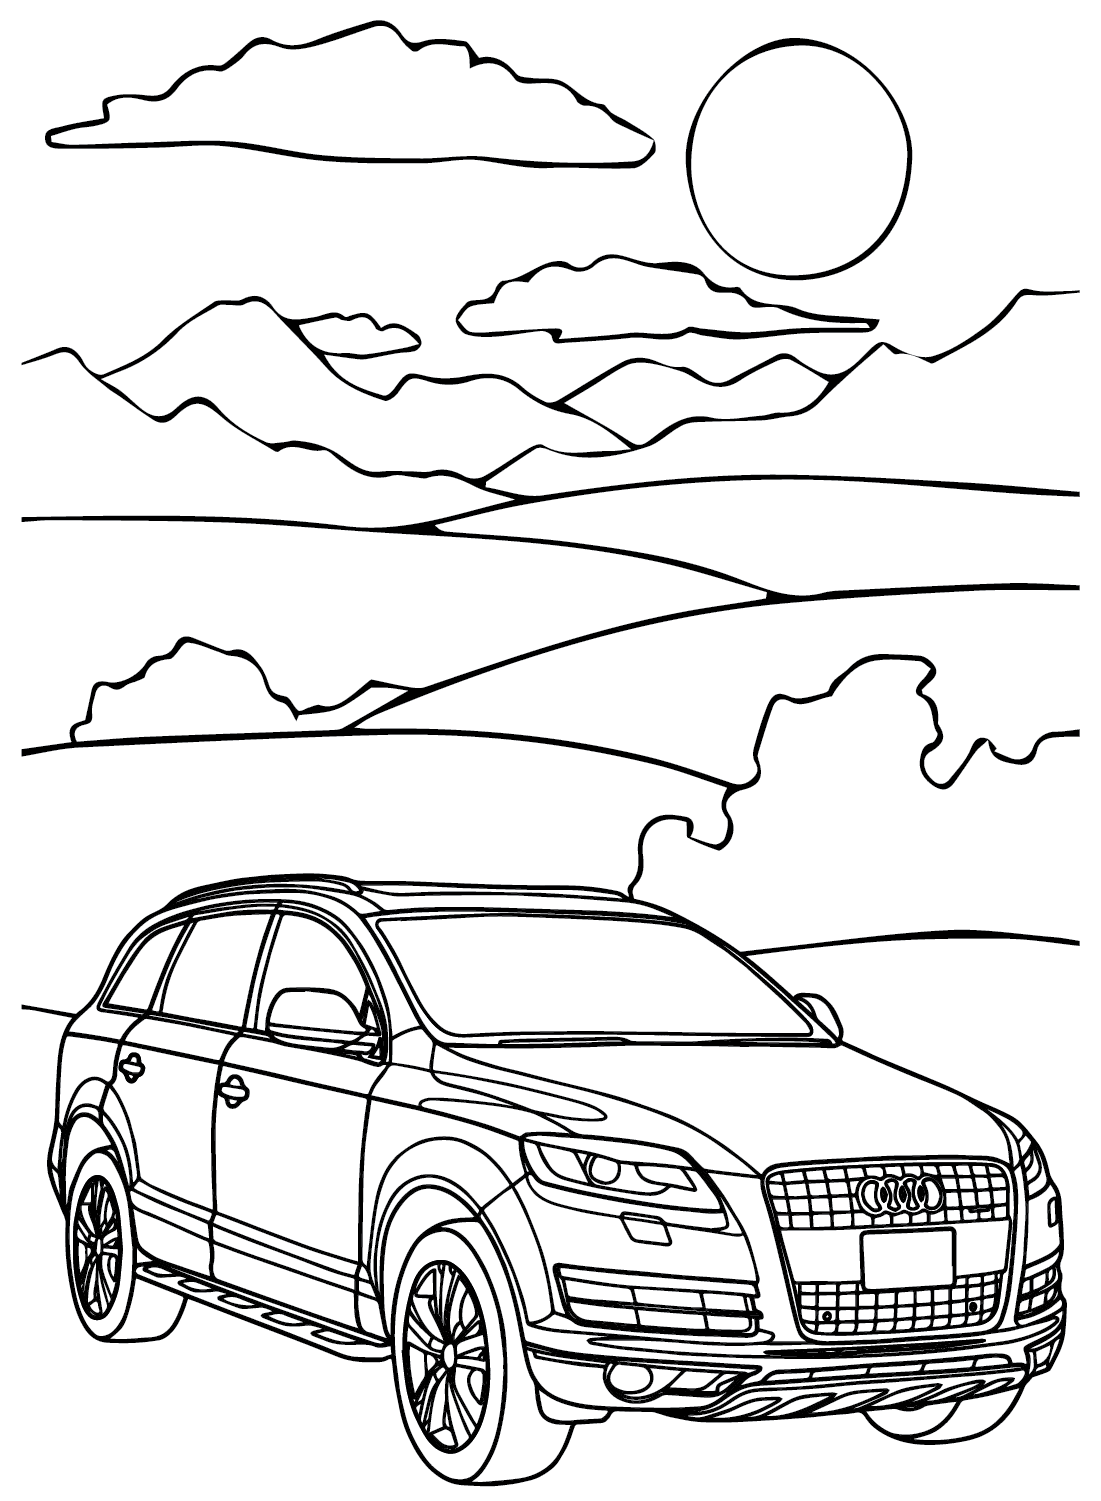 Audi Q7 Model Coloring Page from Audi